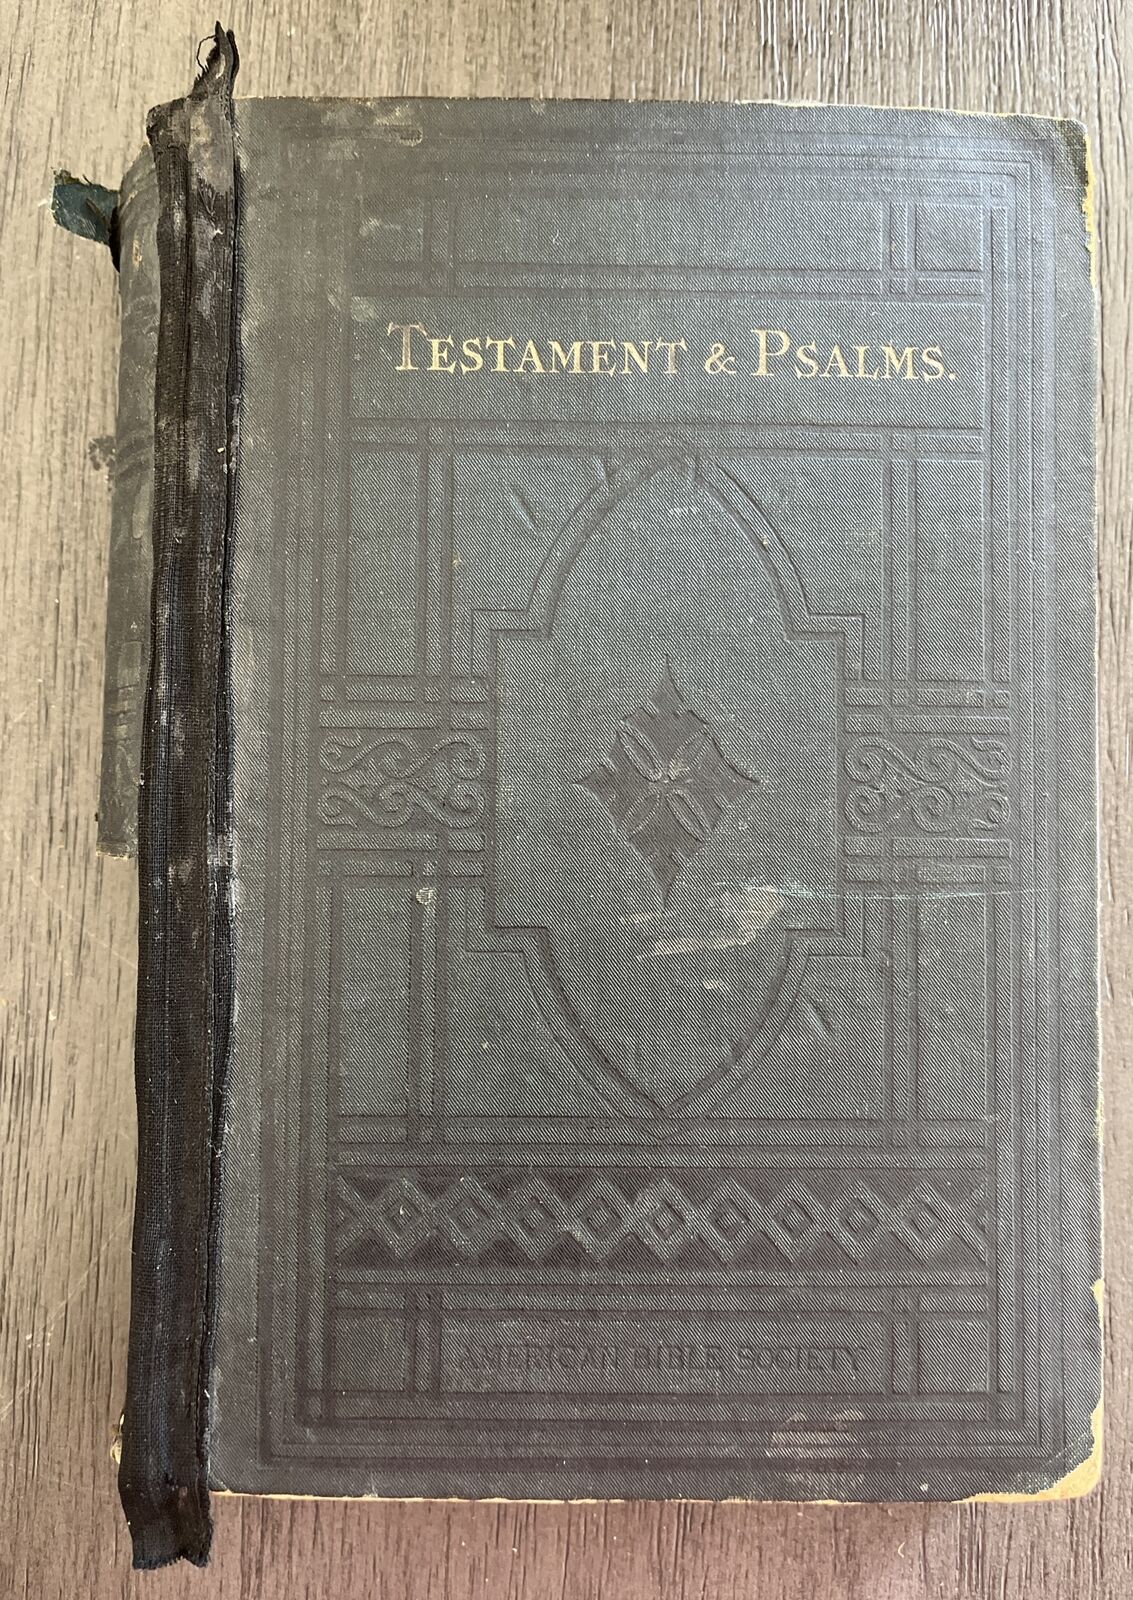 Antique 1891 TESTAMENT & PSALMS by The American Bible Society